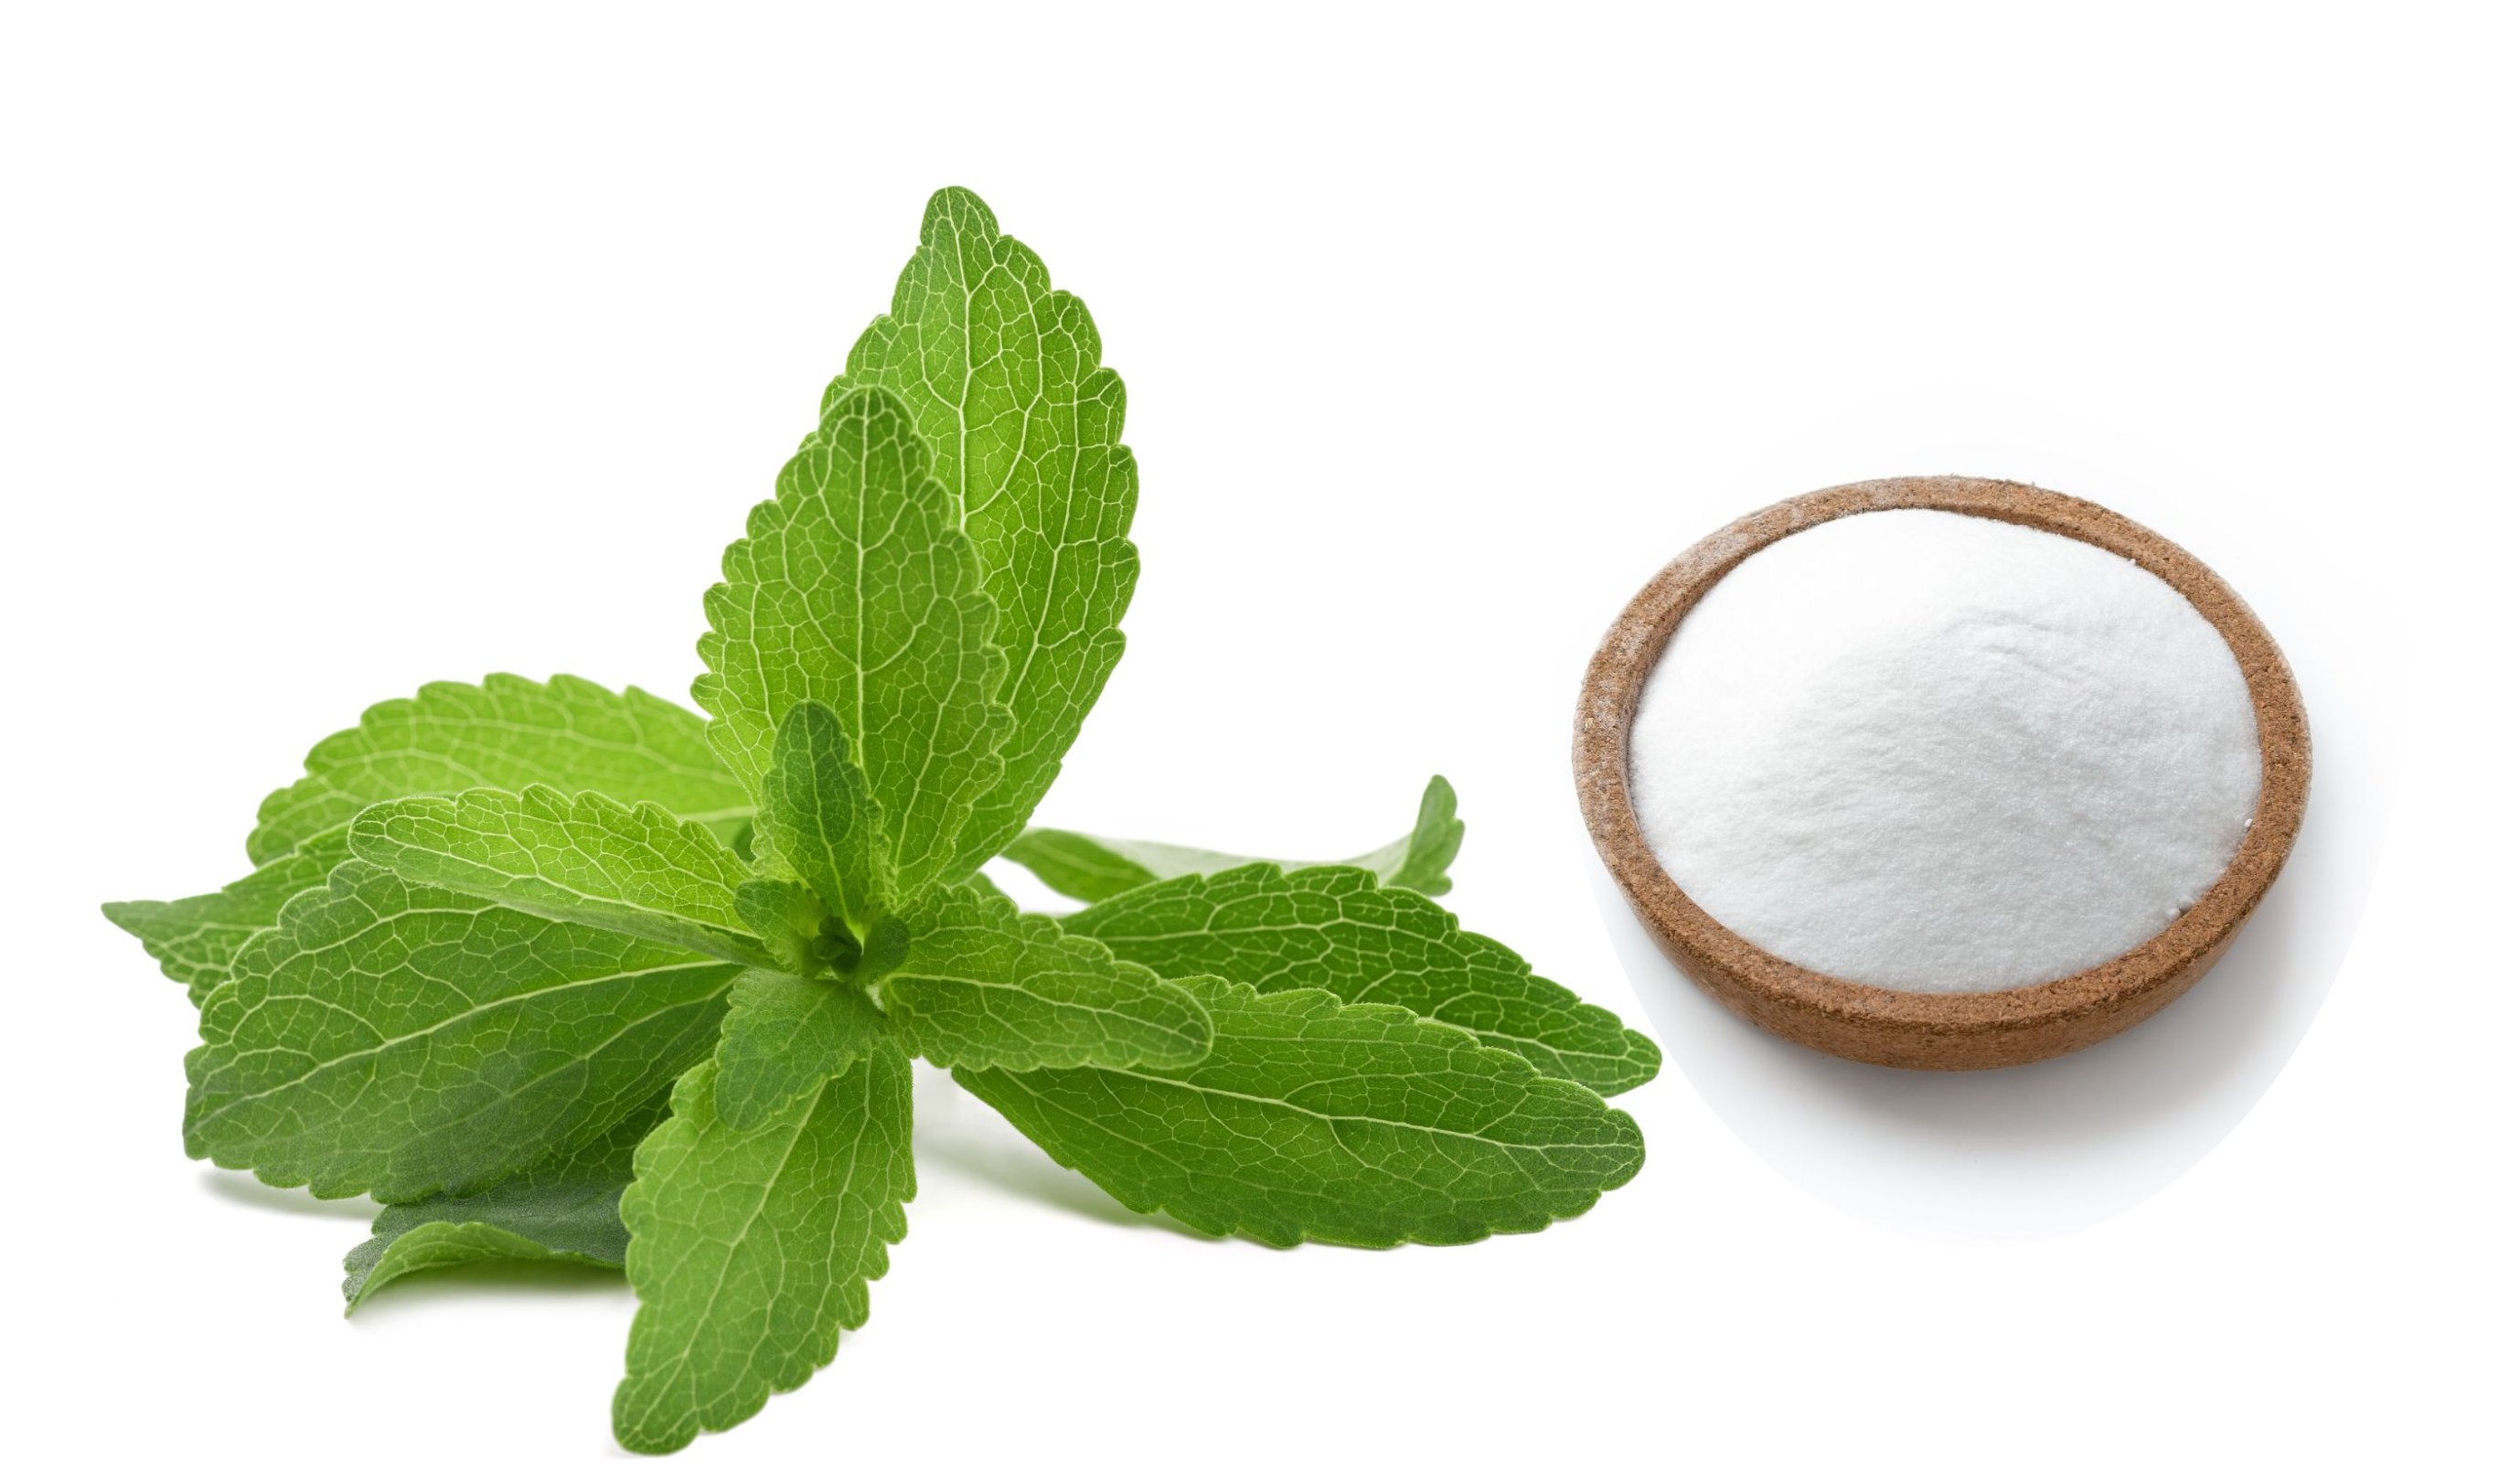 Stevia leaf with Erythritol. These leaves are boiled in filtered water to extract the natural sweetening agent called Steviol glycocides. This product is one of the purest available at &gt;98% and when blended, provides a boost to the overall sweetness of the product. Premium Blend also contains 1/3 Xylitol with provides improved cooking results and flavour.